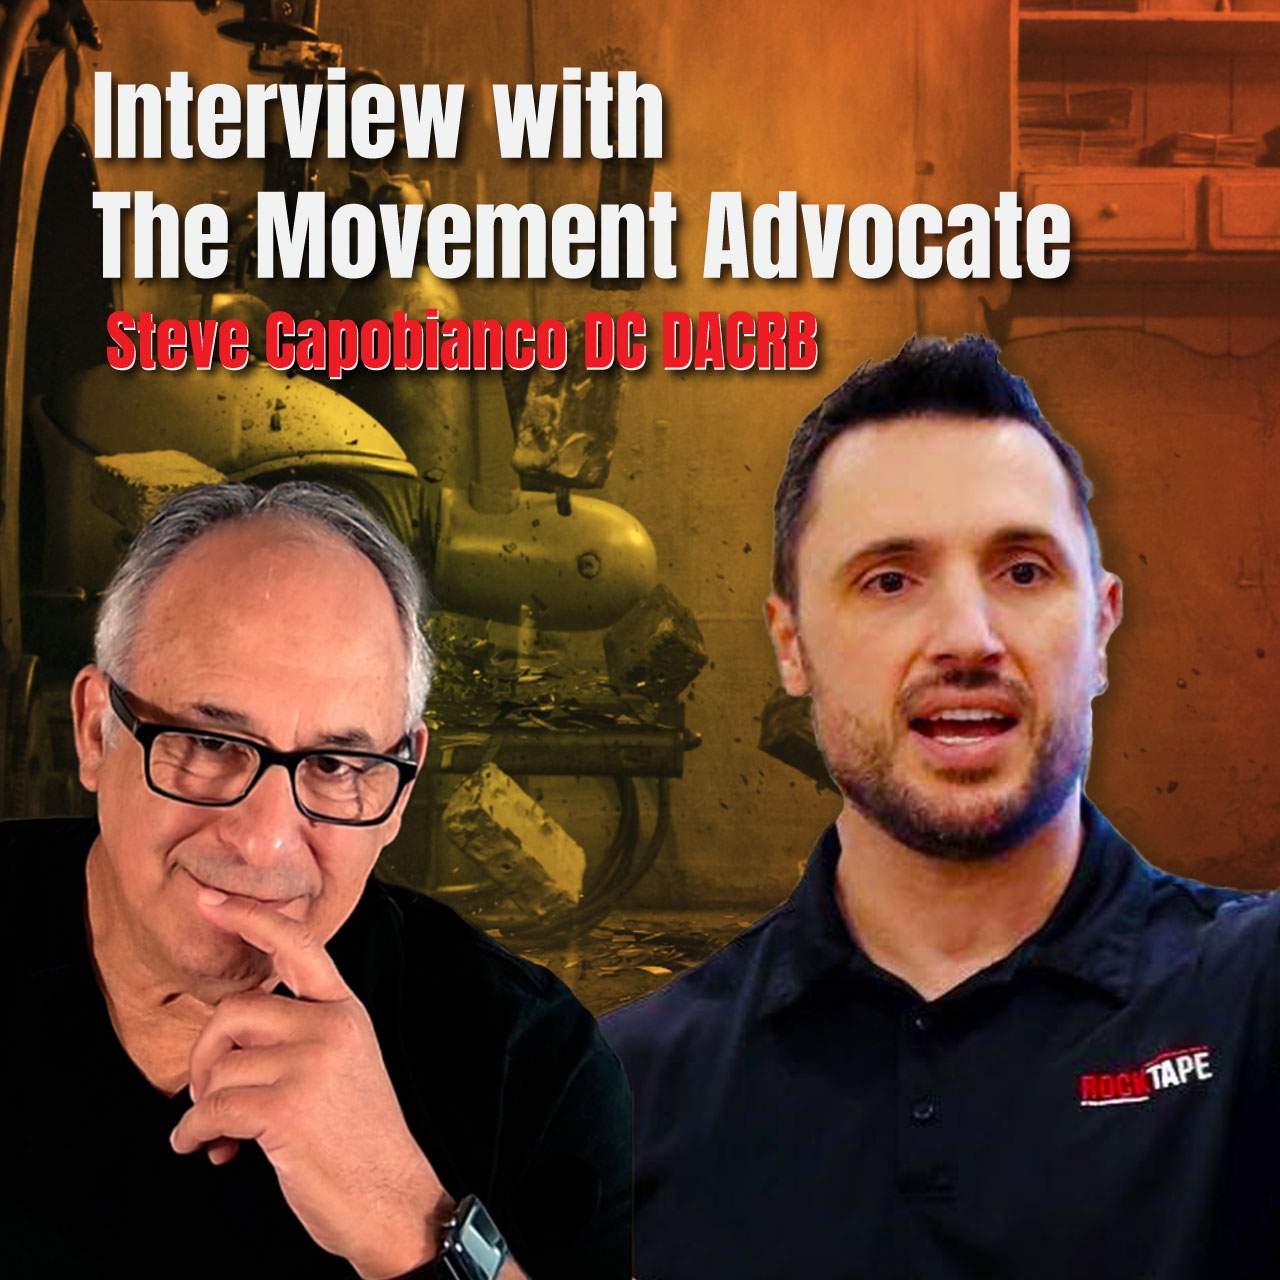 Interview with The Movement Advocate, Dr. Steve Capobianco